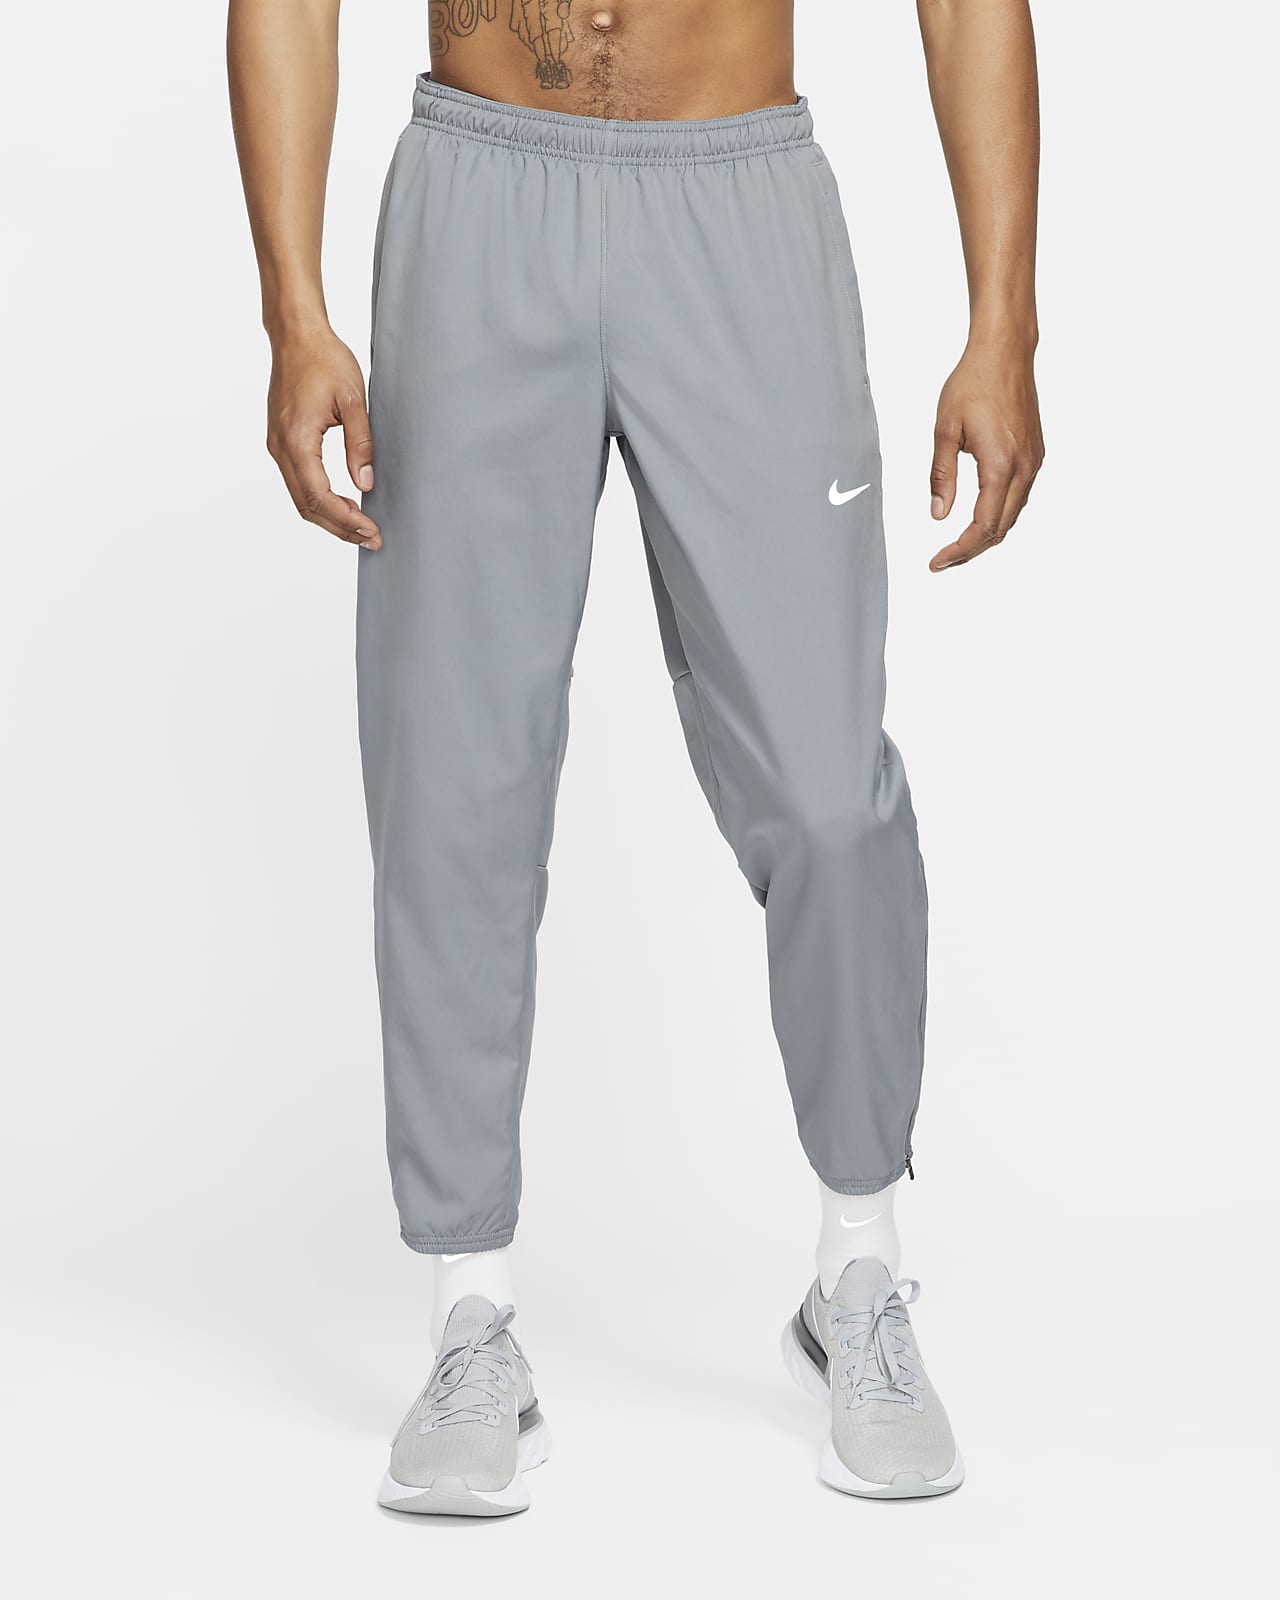 Mens Running Pants and Tights  REI Coop